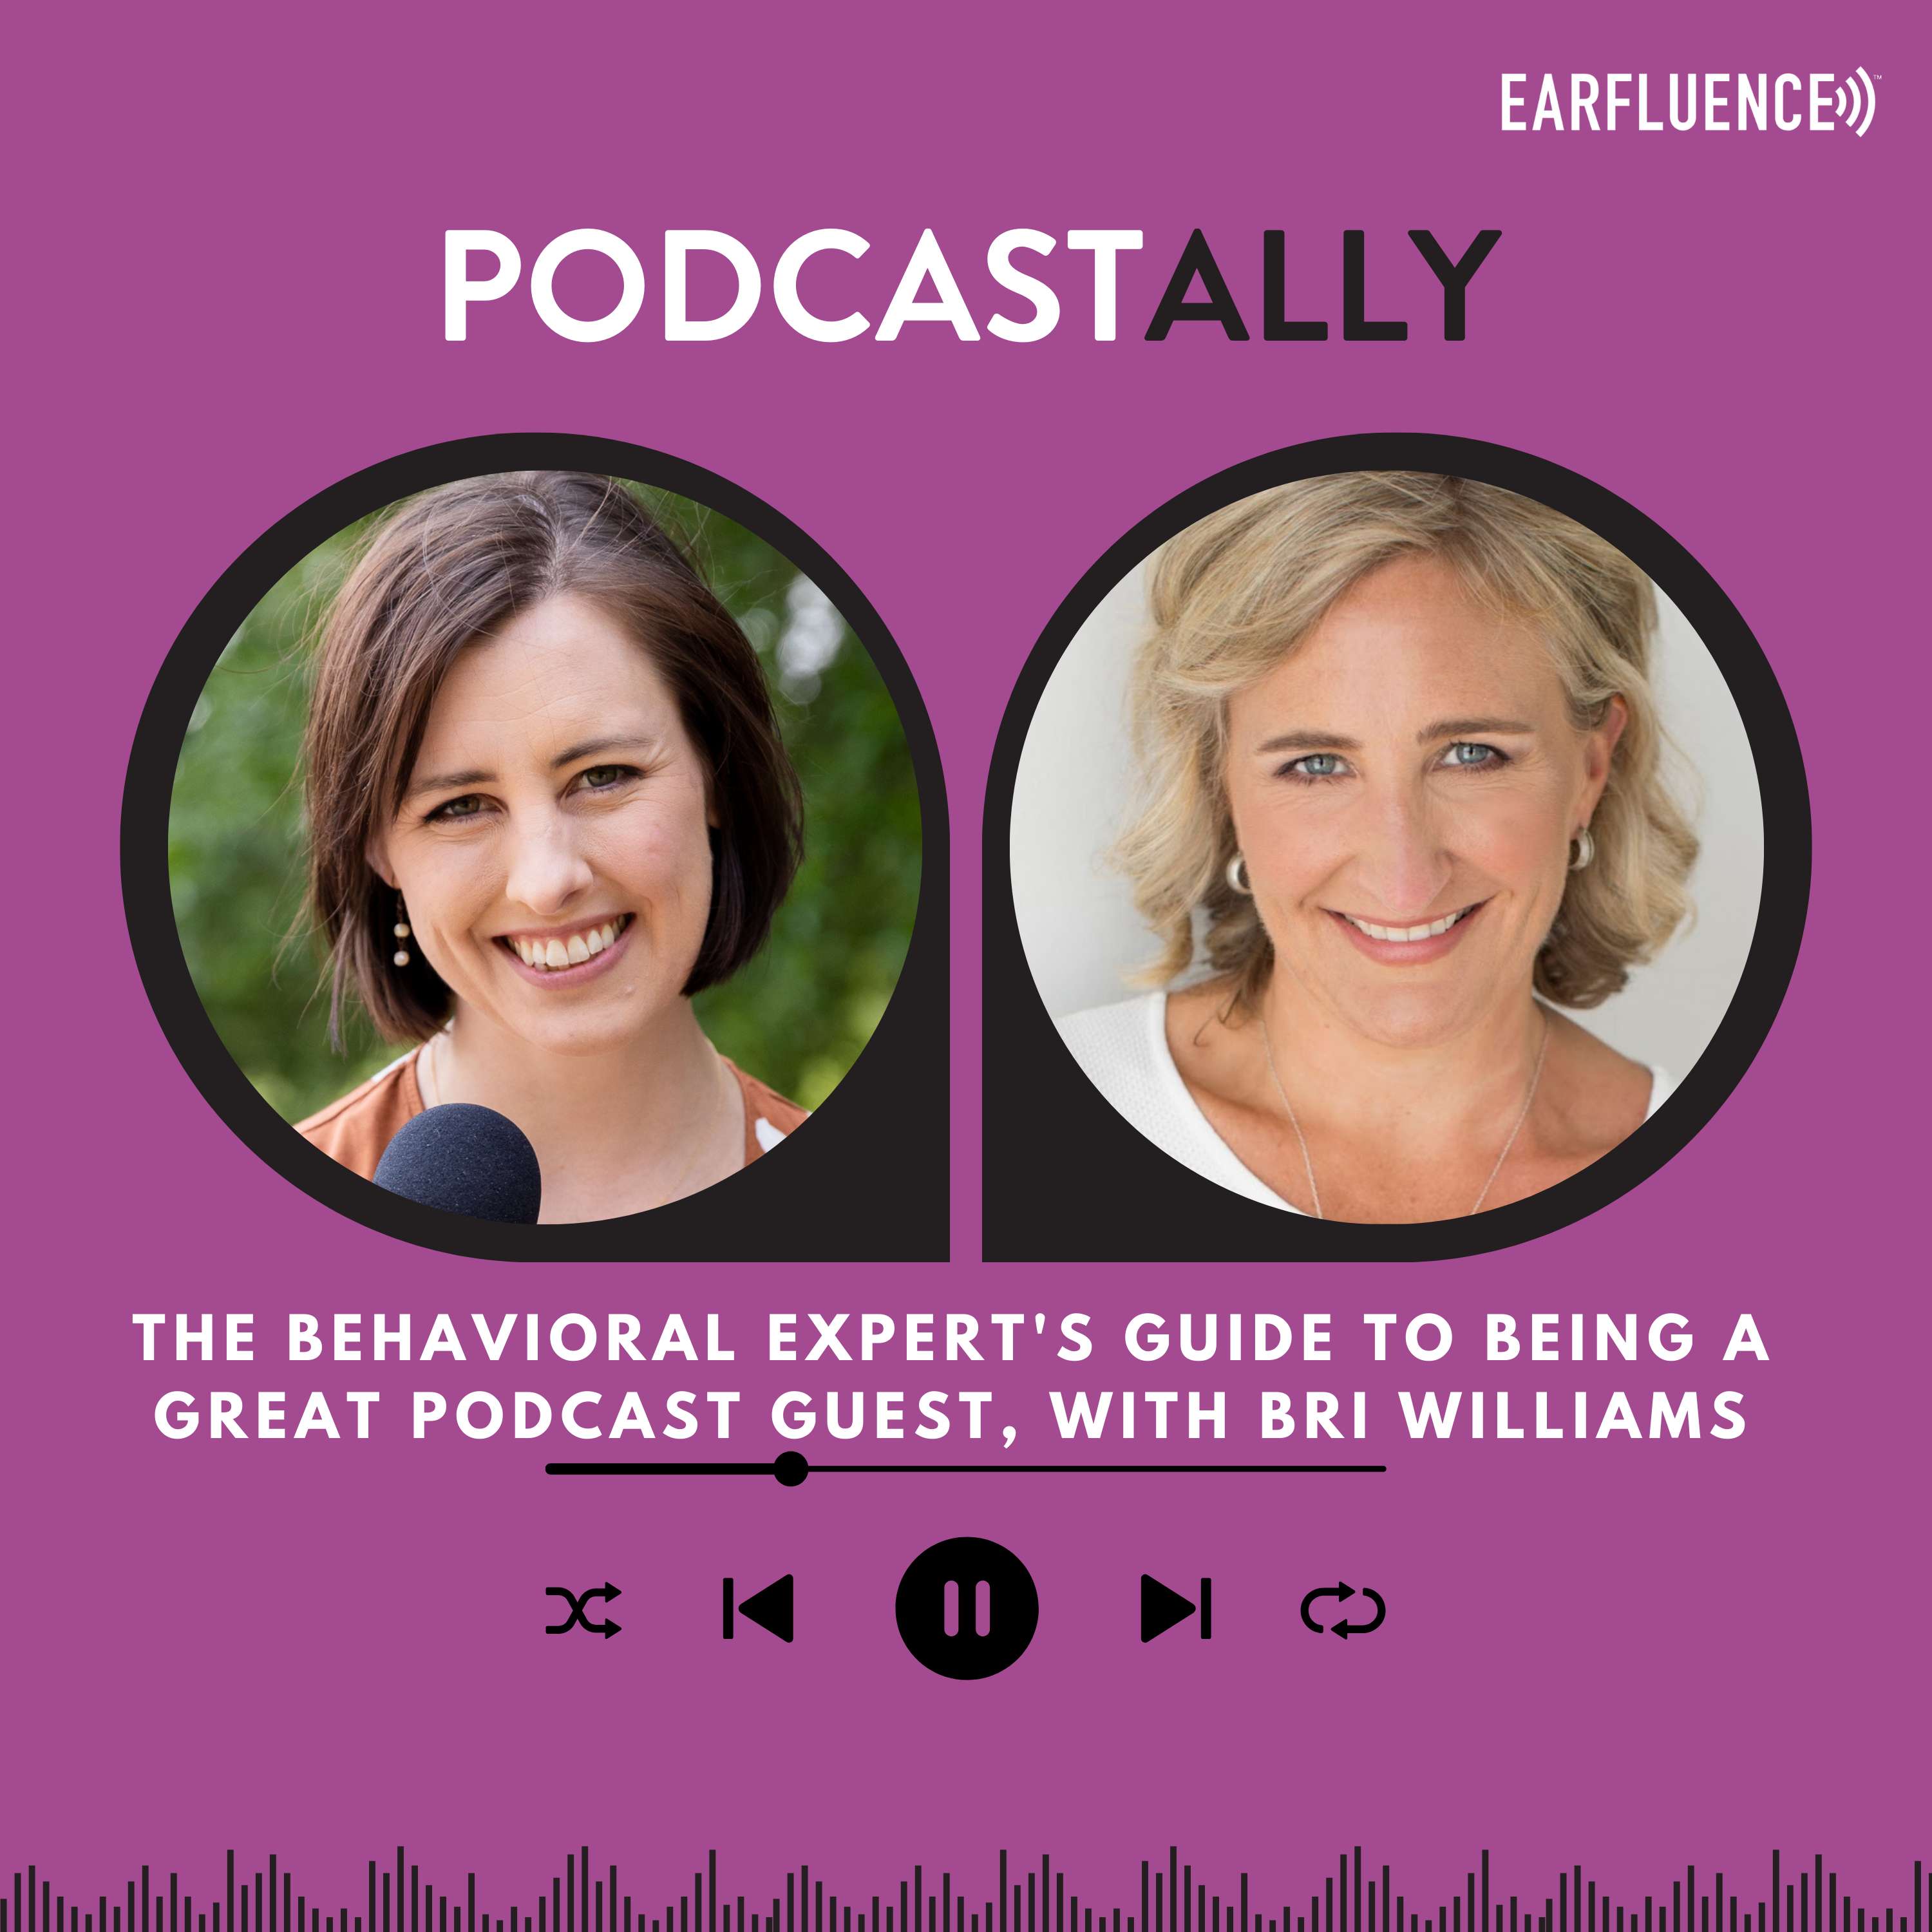 The Behavioral Expert’s Guide to Being a Great Podcast Guest